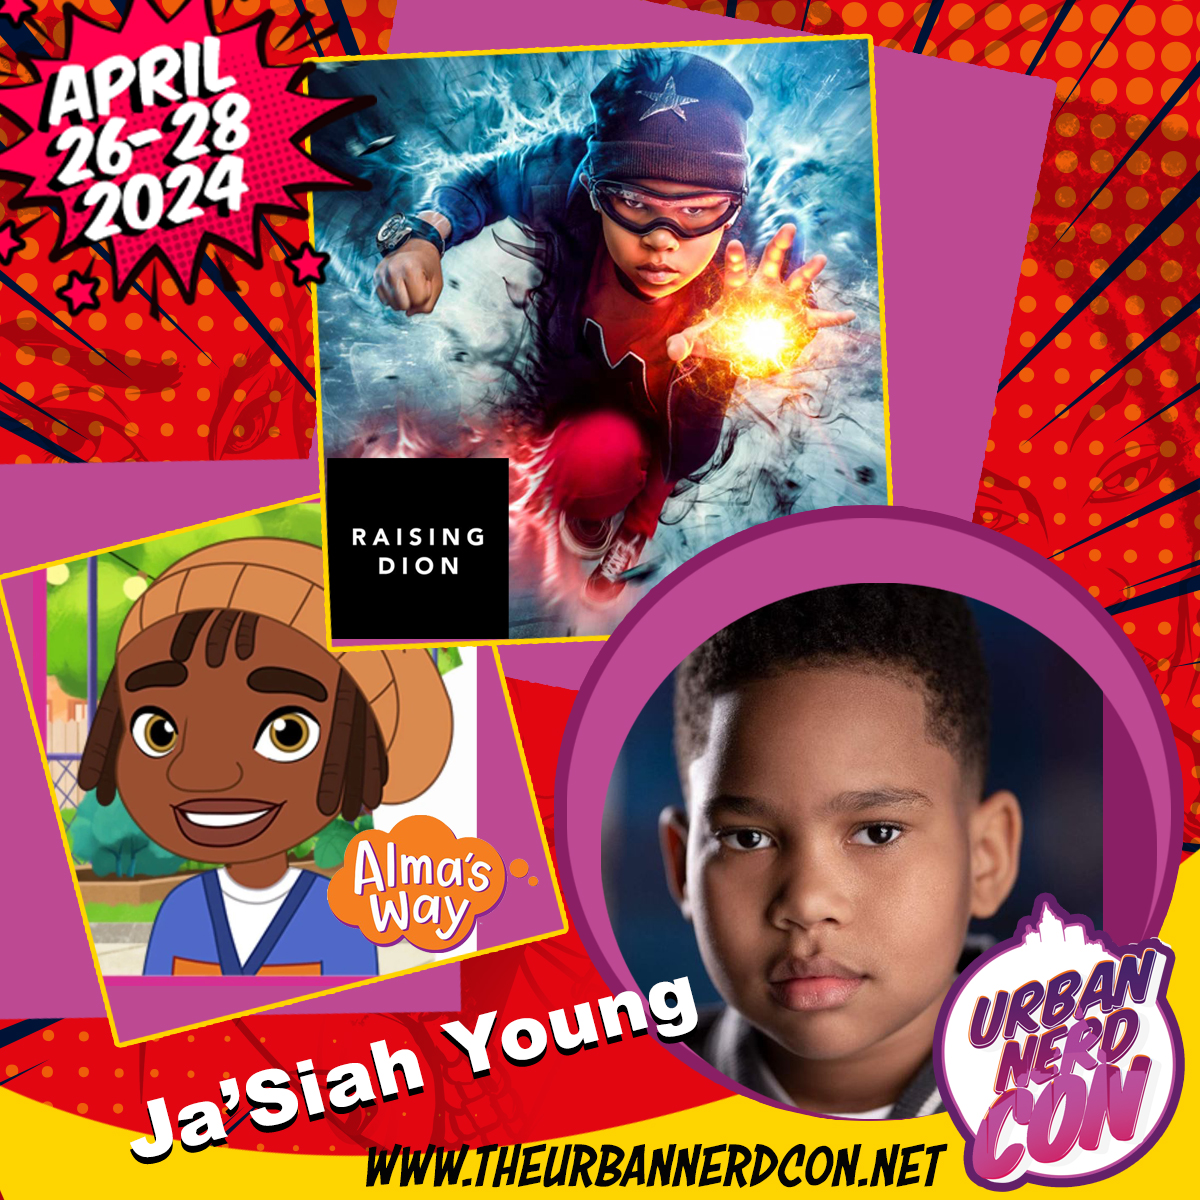 Say hello to our last guest of 2024 Mr. Ja'Siah Young star of Raising Dion! Get Your Badges NOW!!! Donate a Young Nerd badge through our Kickstarter! Let's give 160 young blerds a once in a lifetime experience!!! Share and sponsor a kid! kickstarter.com/projects/theur…?